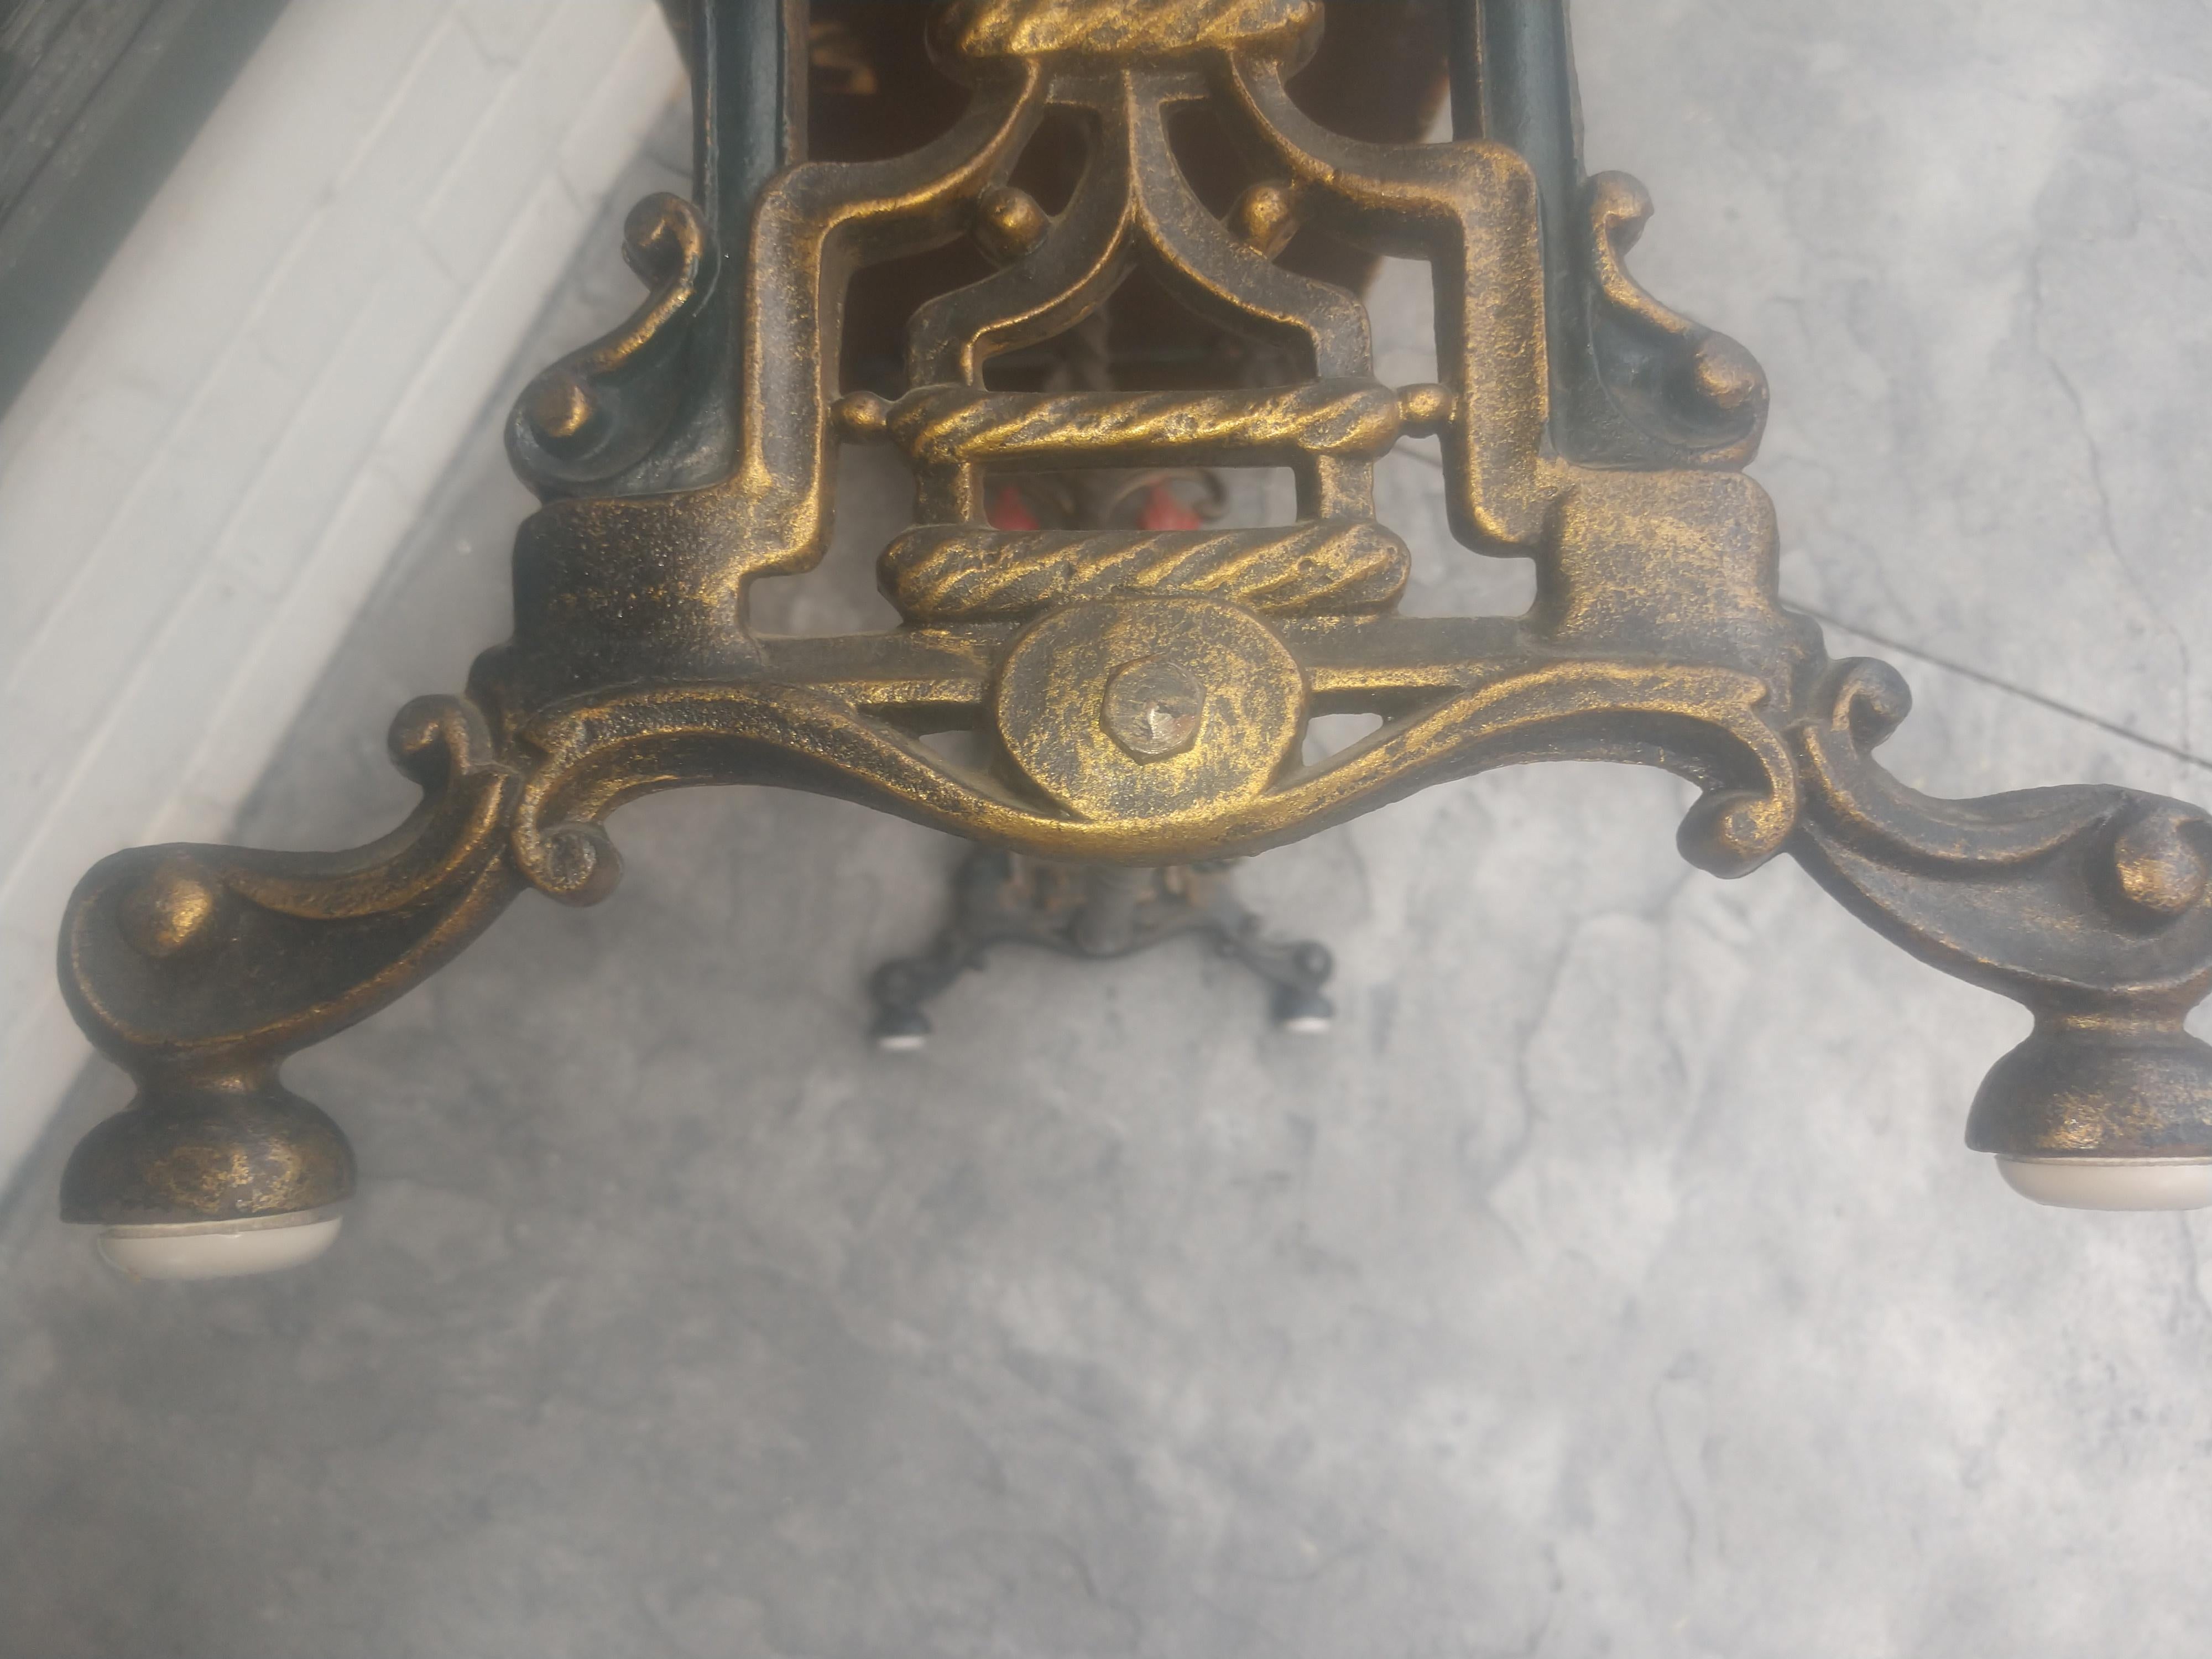 Cast iron bench with faces cast in the iron and all original paint and fabric. Fabric is serviceable and a little dated an easy update. In excellent vintage condition with almost no wear.